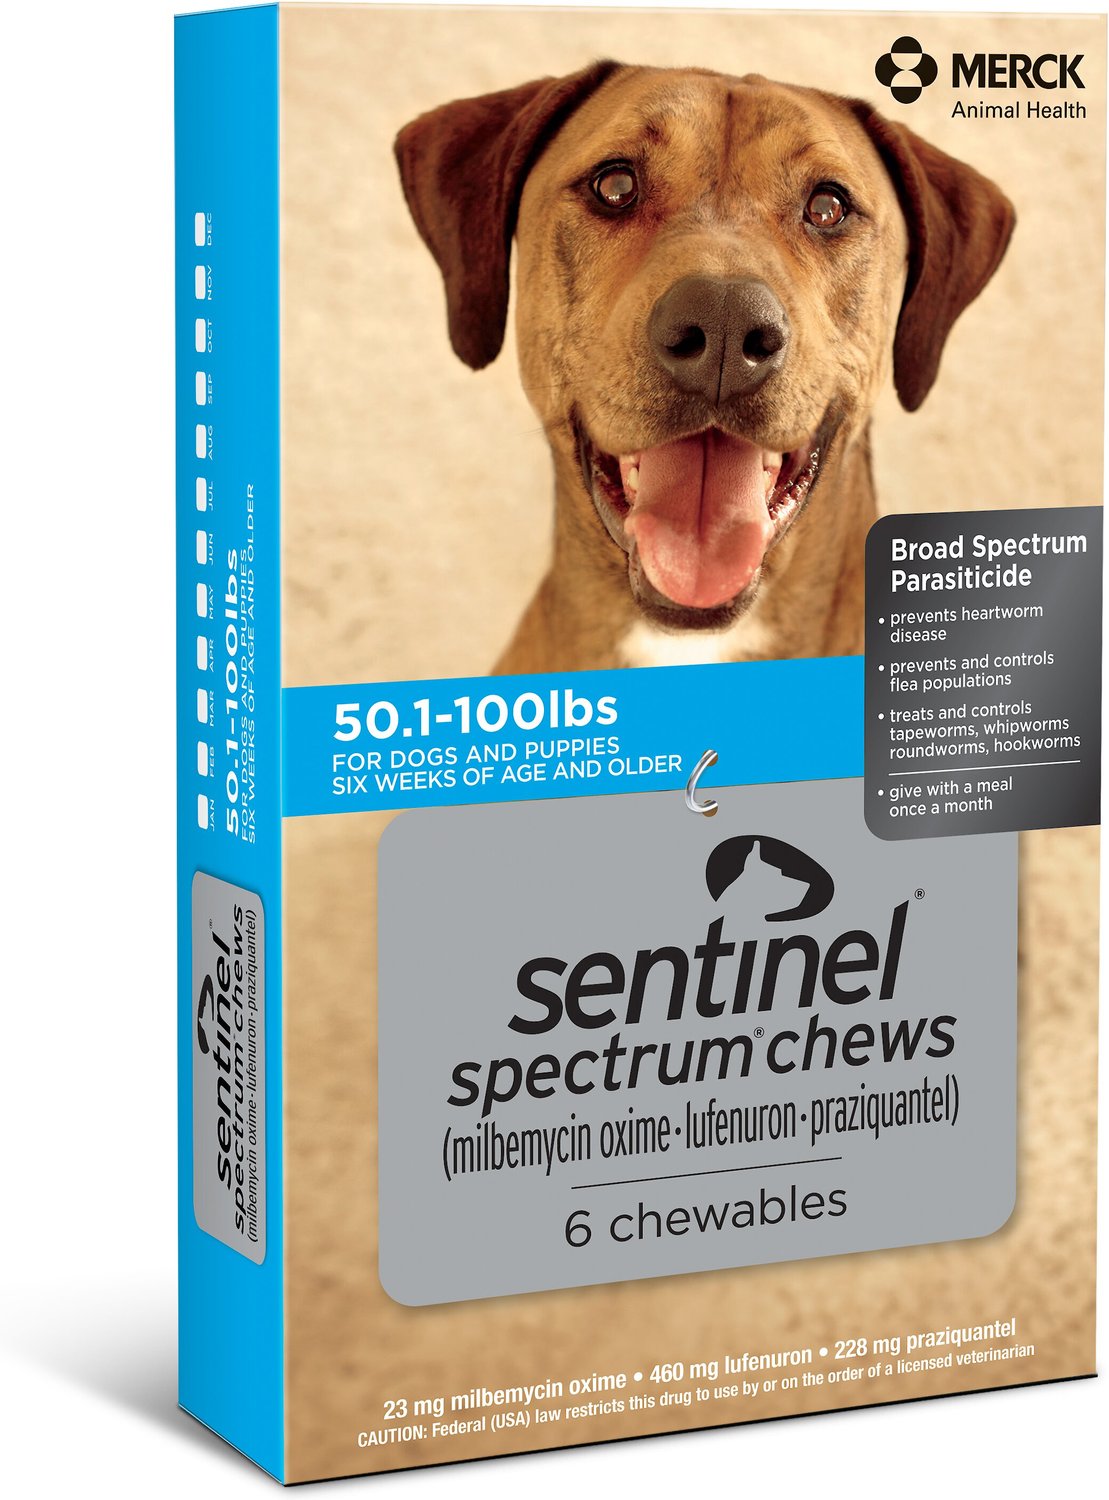 Sentinel Spectrum Chewable Tablets For Dogs 50 1 100 Lbs 6 Treatments 